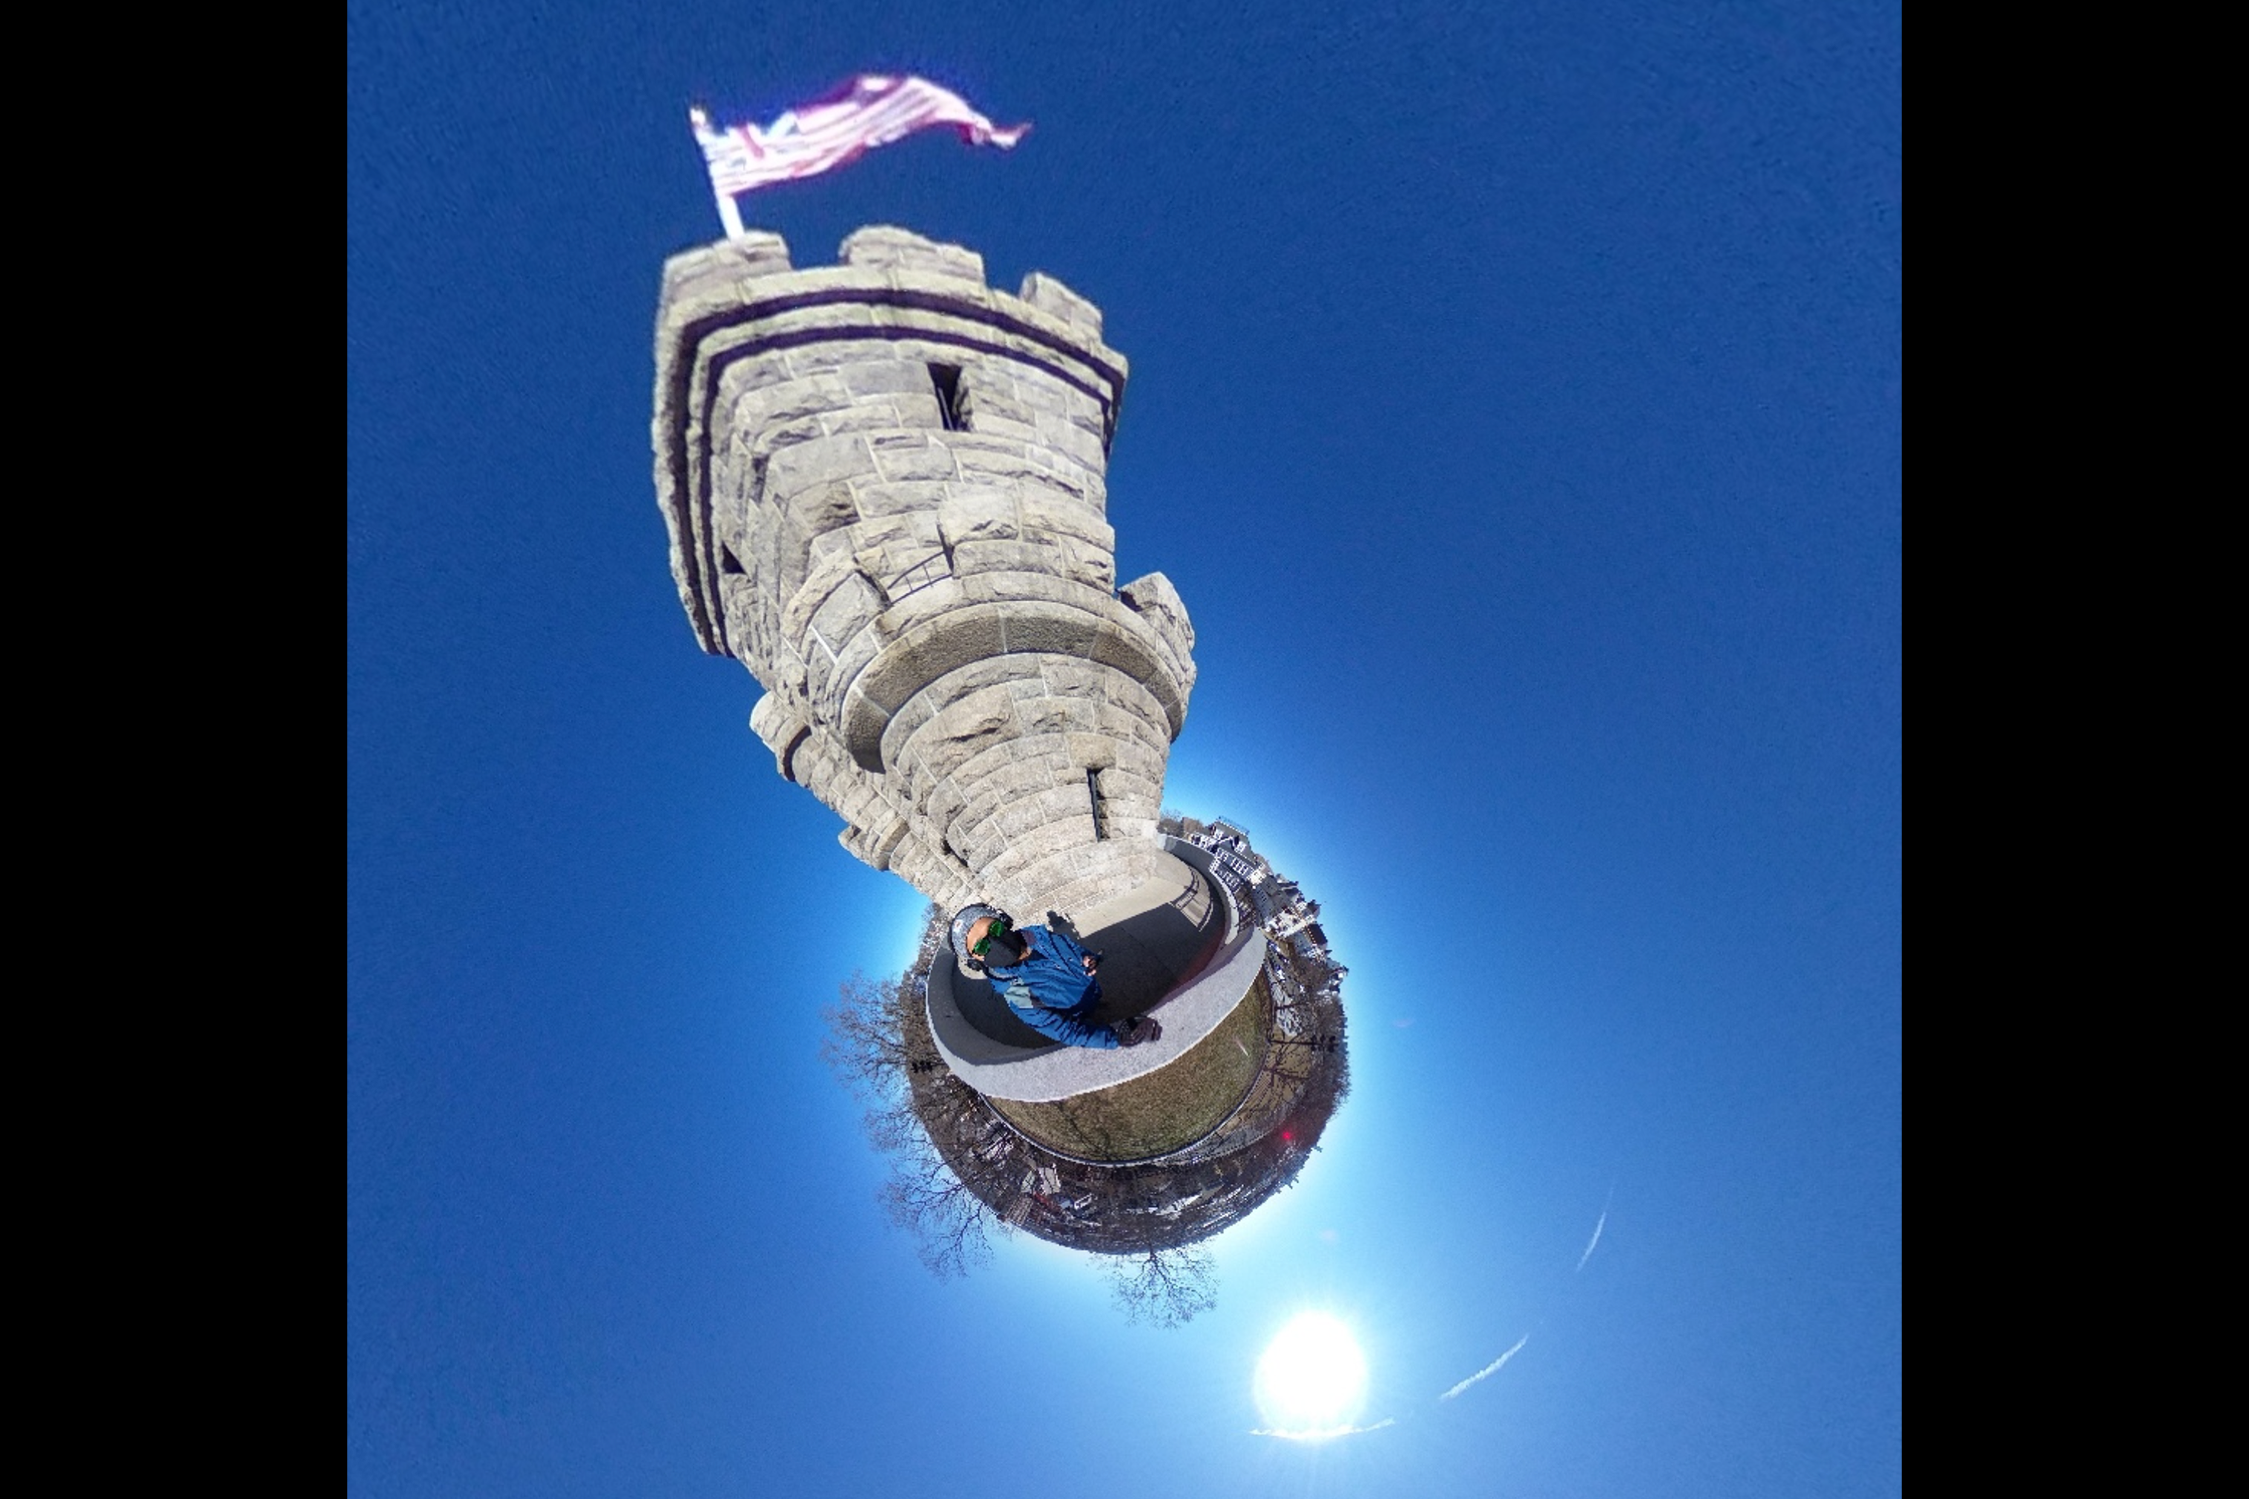 Rohan Kundargi, Program Administrator for MIT’s Office of Government & Community Relations, uses a Ricoh Theta Z1 360 camera and monopod to practice his 360-degree photography skills at the Prospect Hill Monument in Somerville, MA.